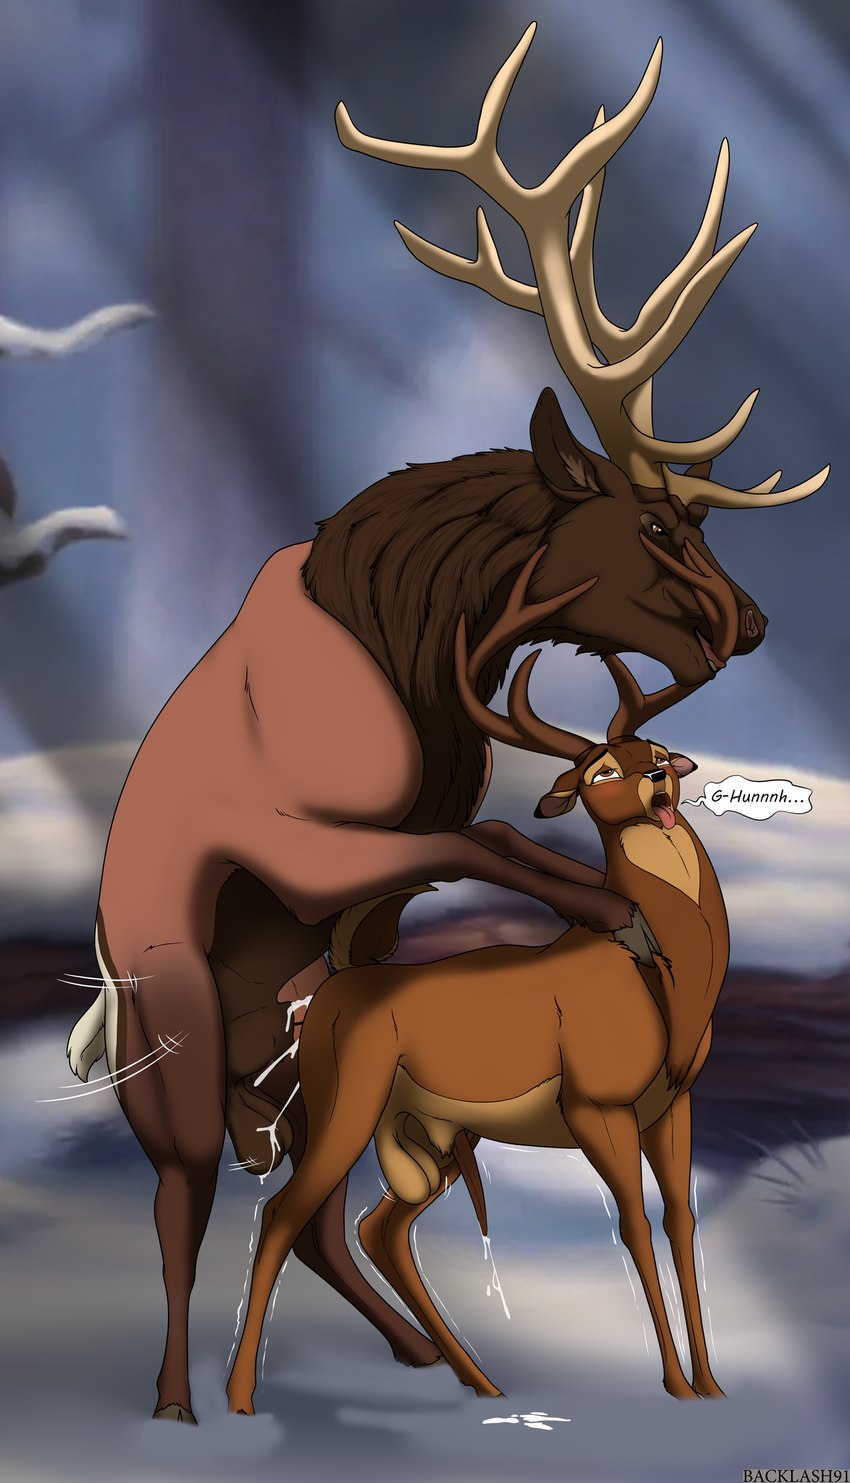 the great prince of the forest (bambi (film) and etc) created by backlash91